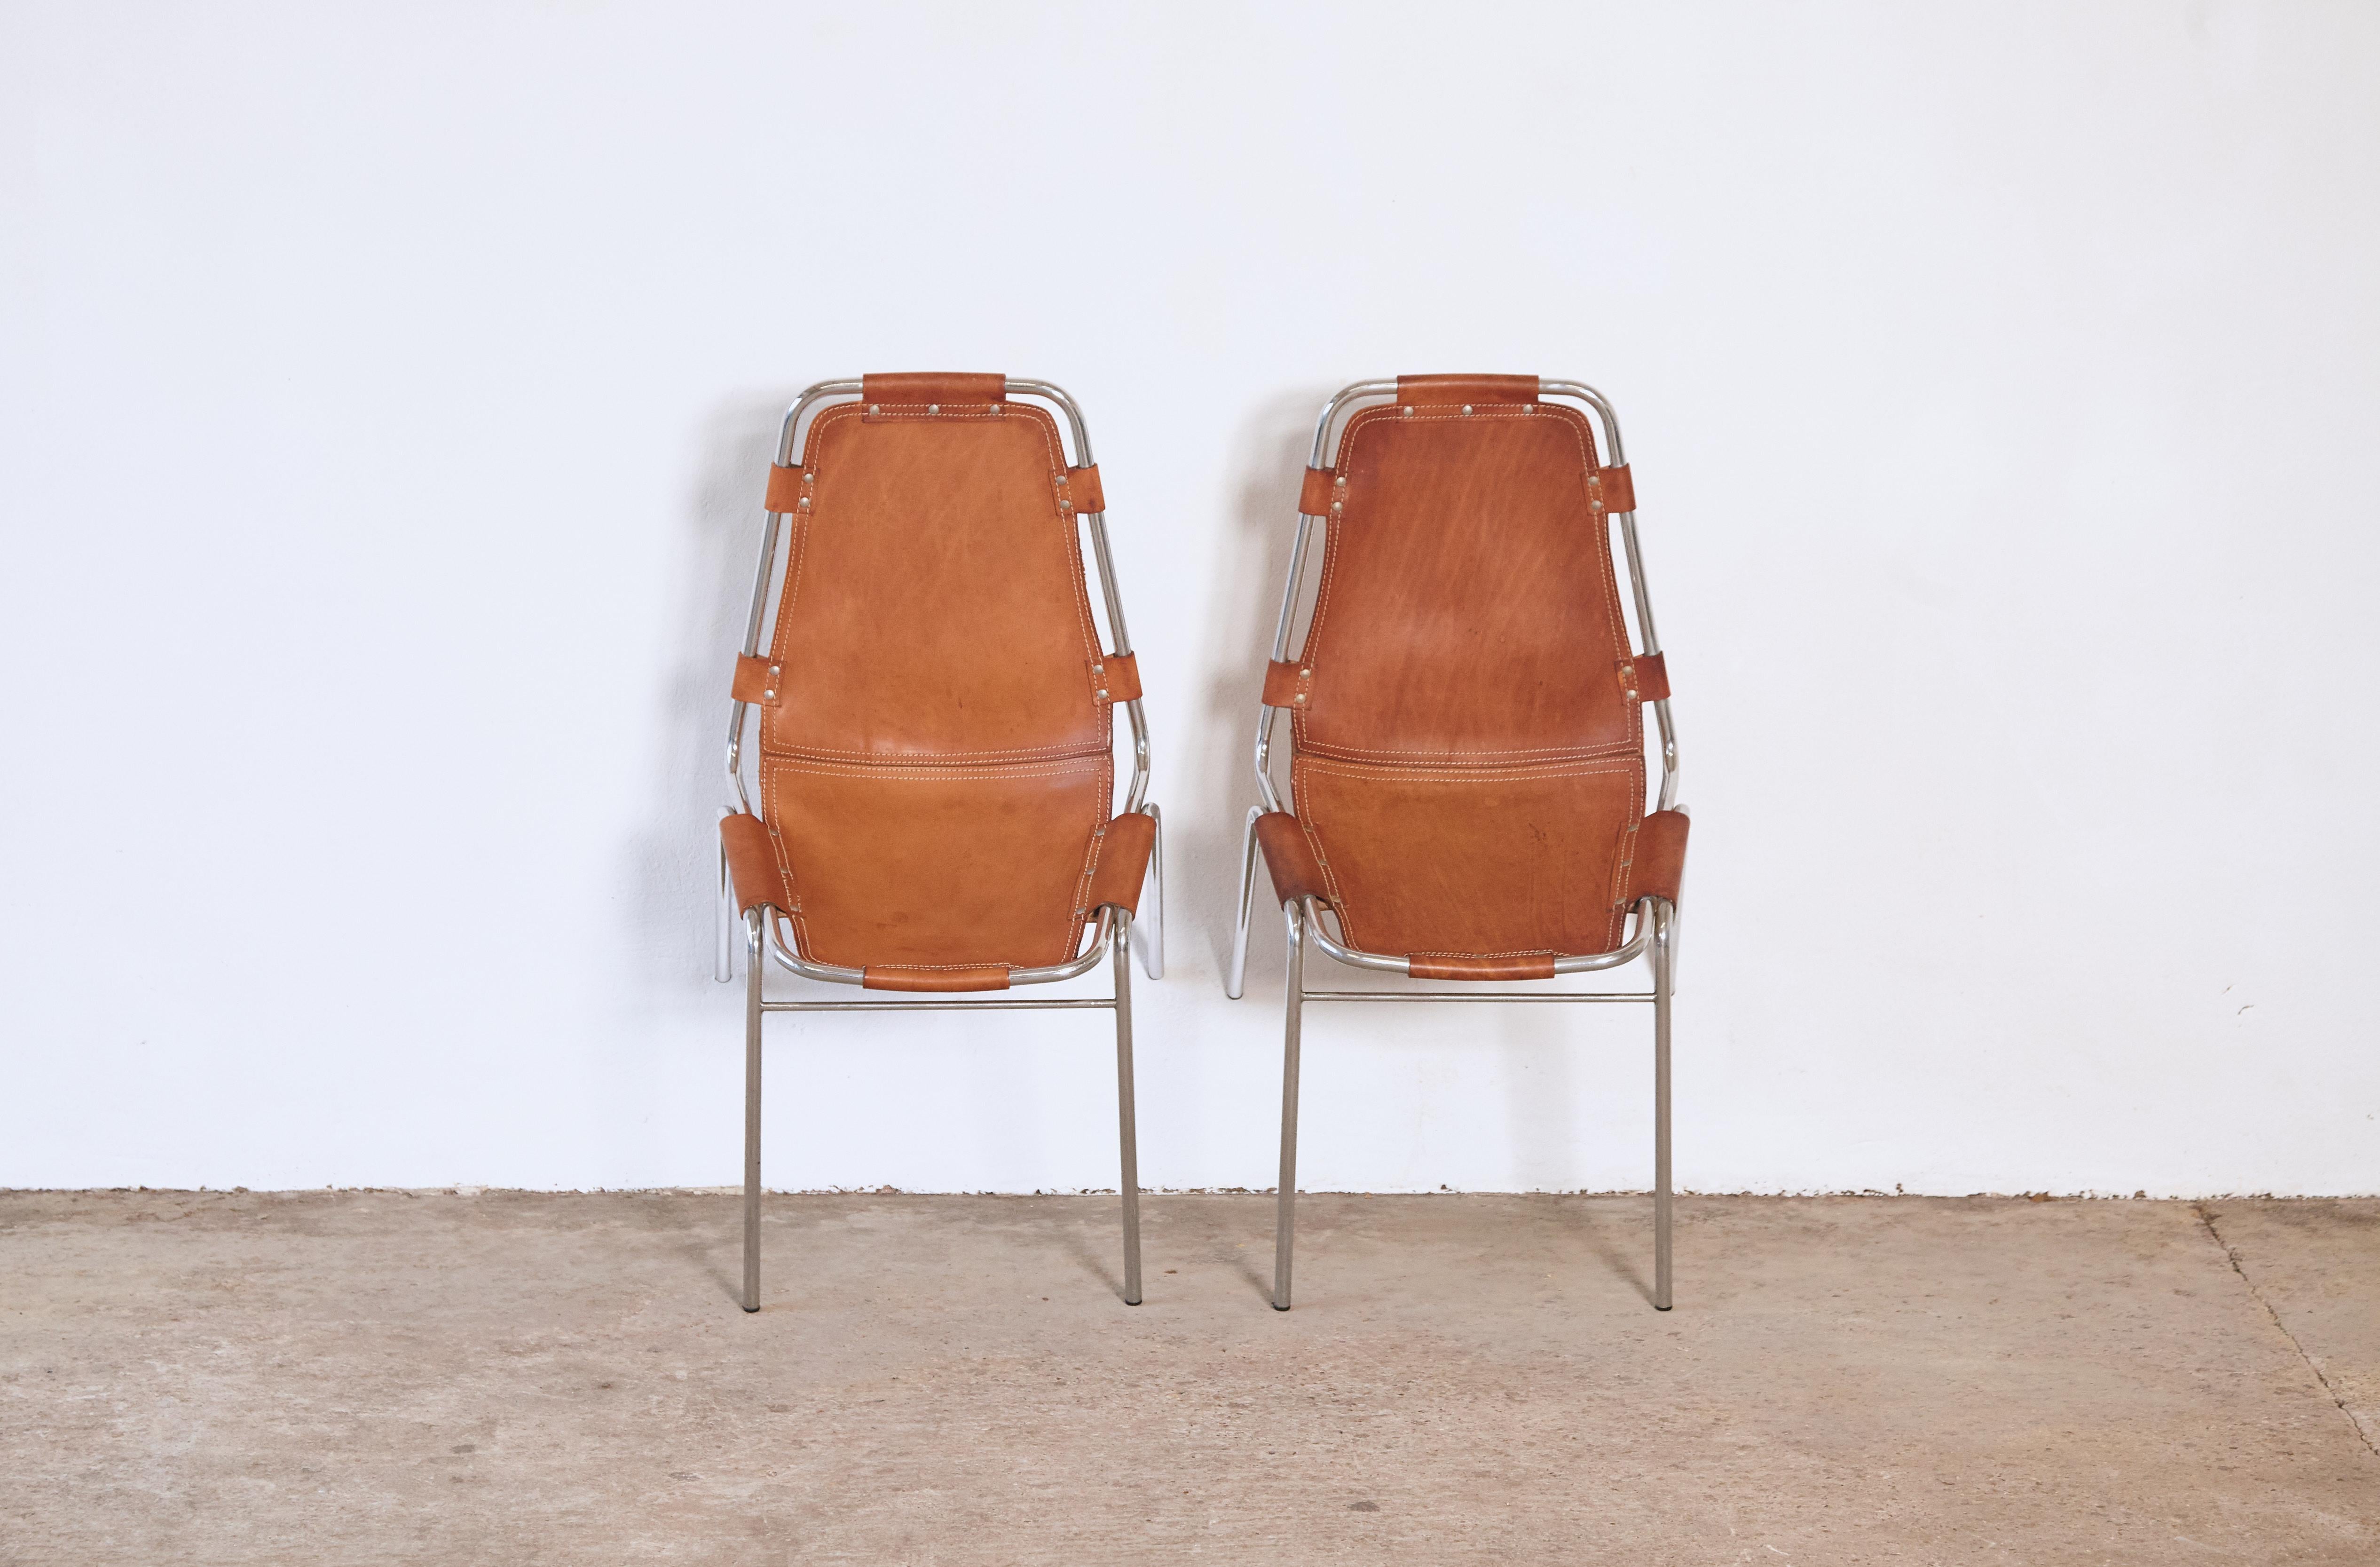 20th Century Pair of 'Les Arcs' Chairs Selected by Charlotte Perriand, 1970s